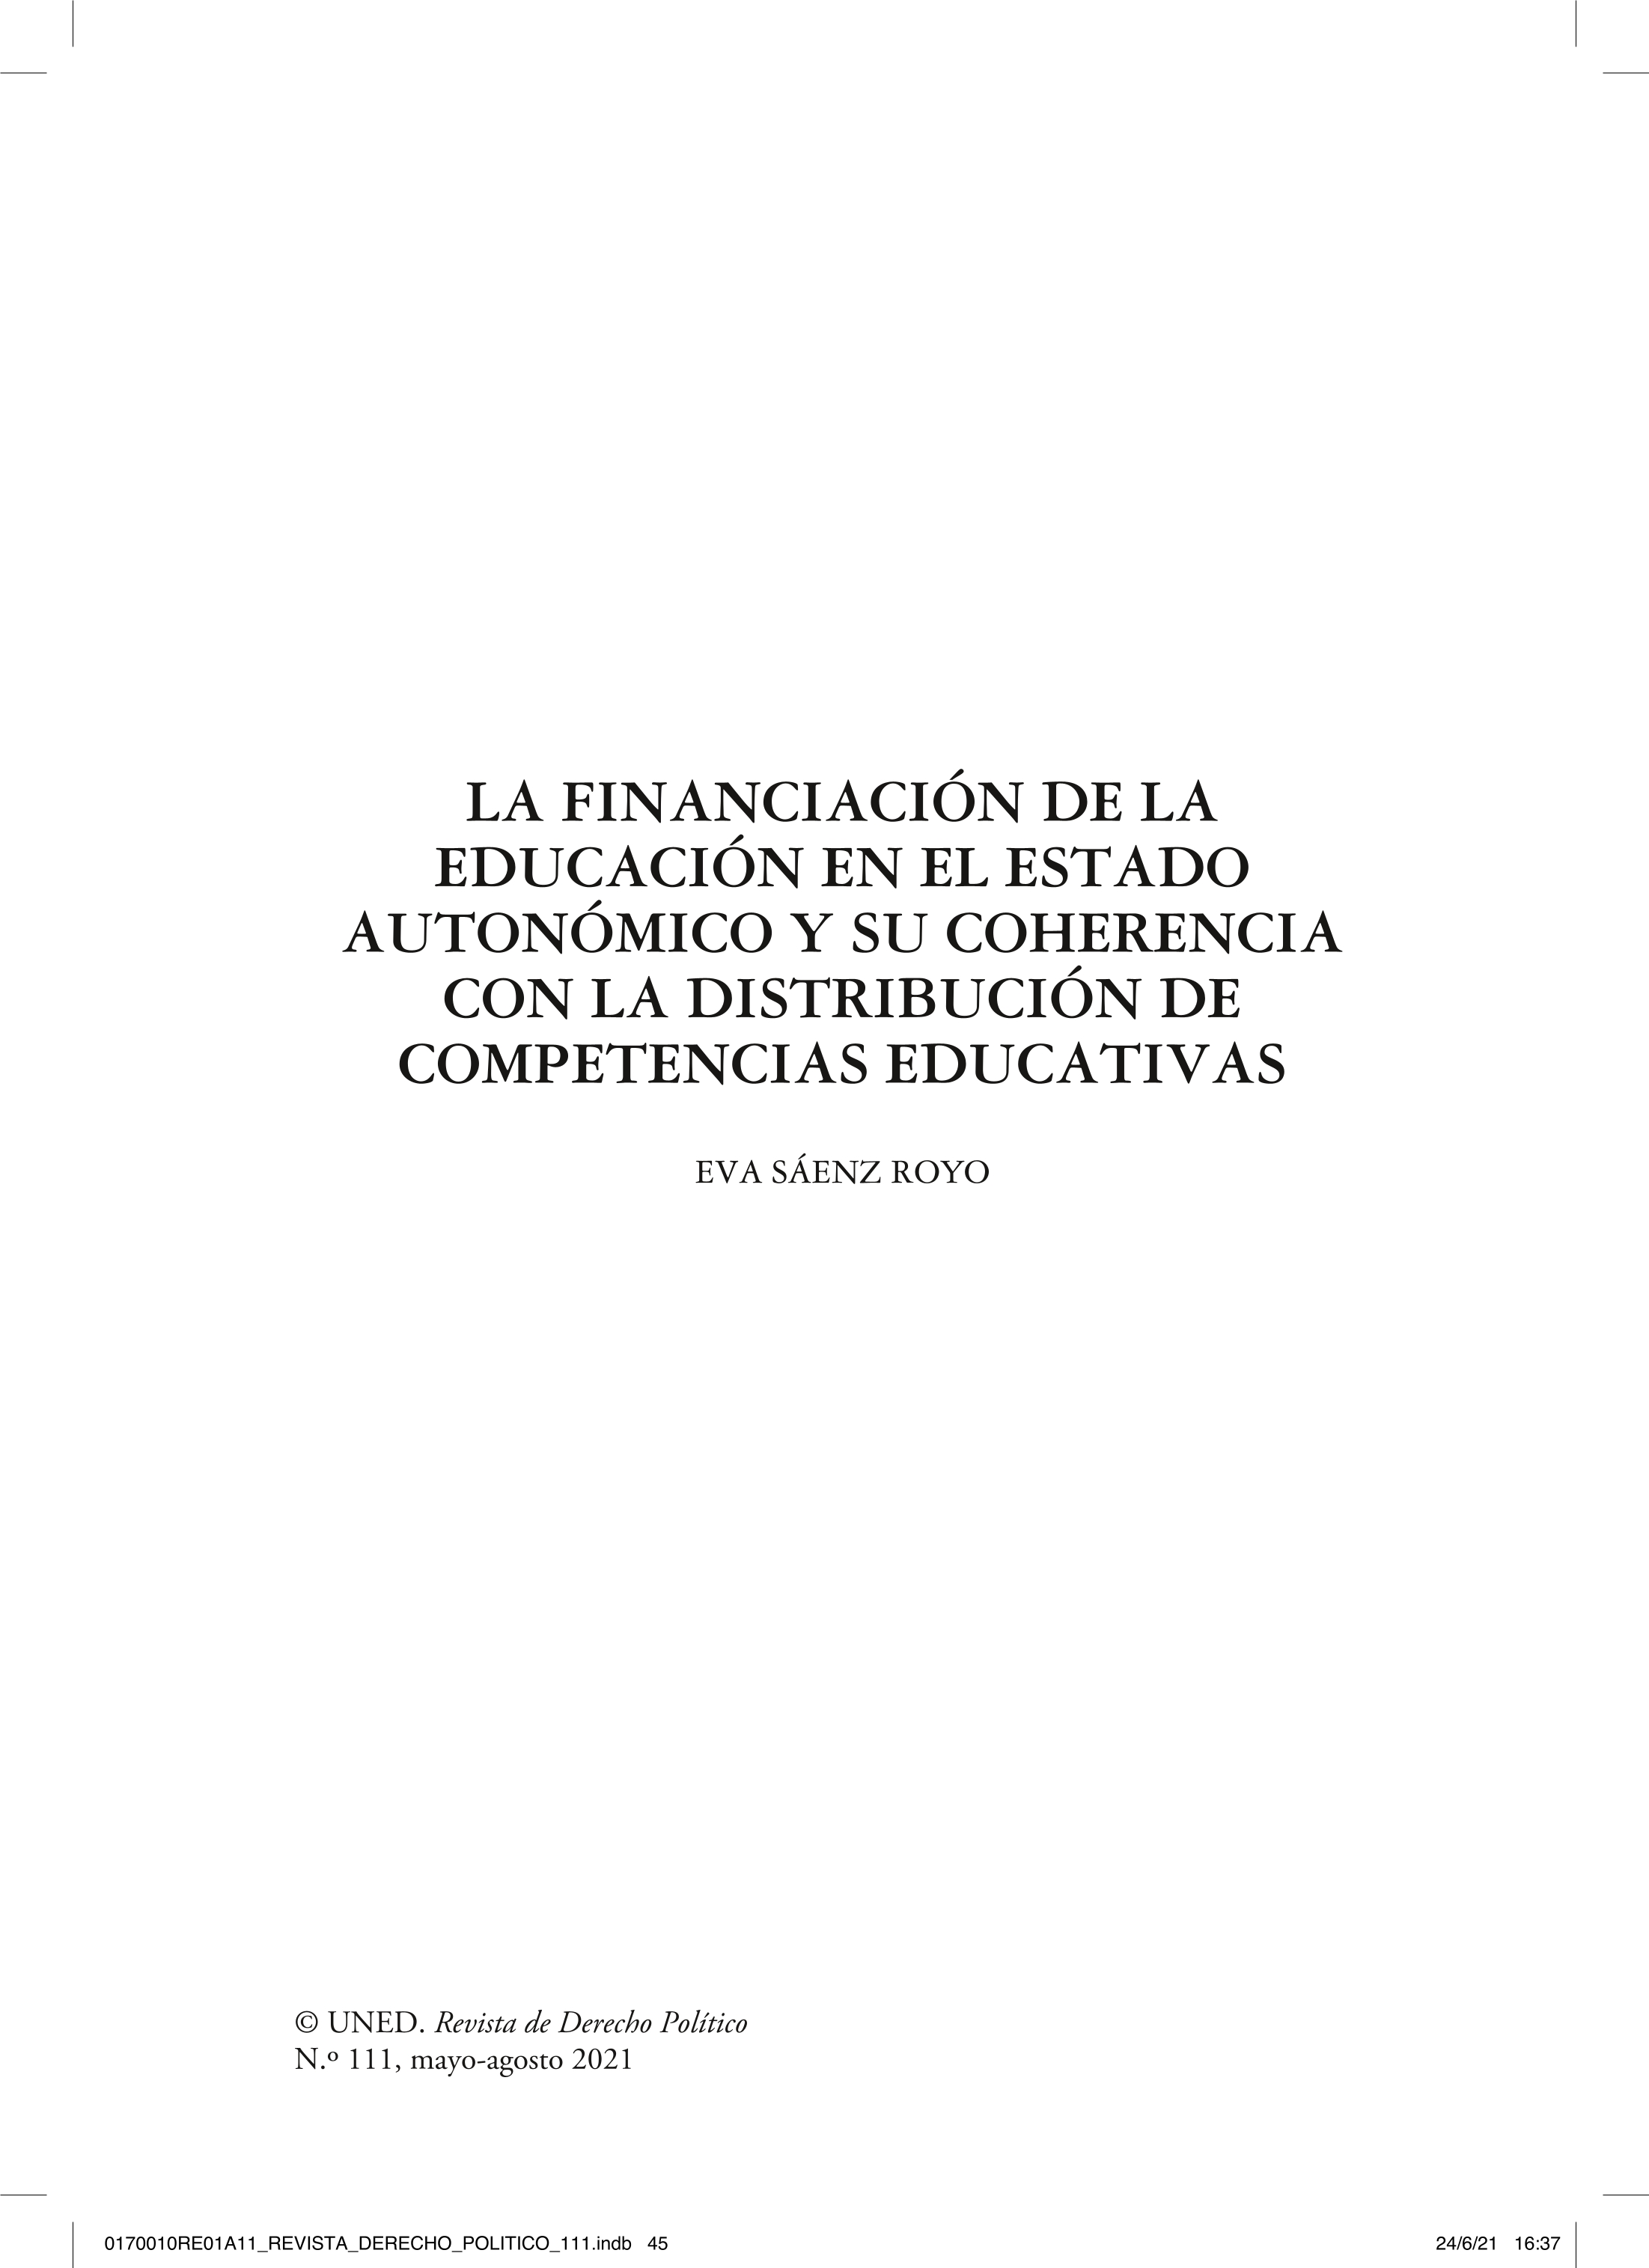 The financing of the education in the autonomous state and its coherence with the distribution of educational competences